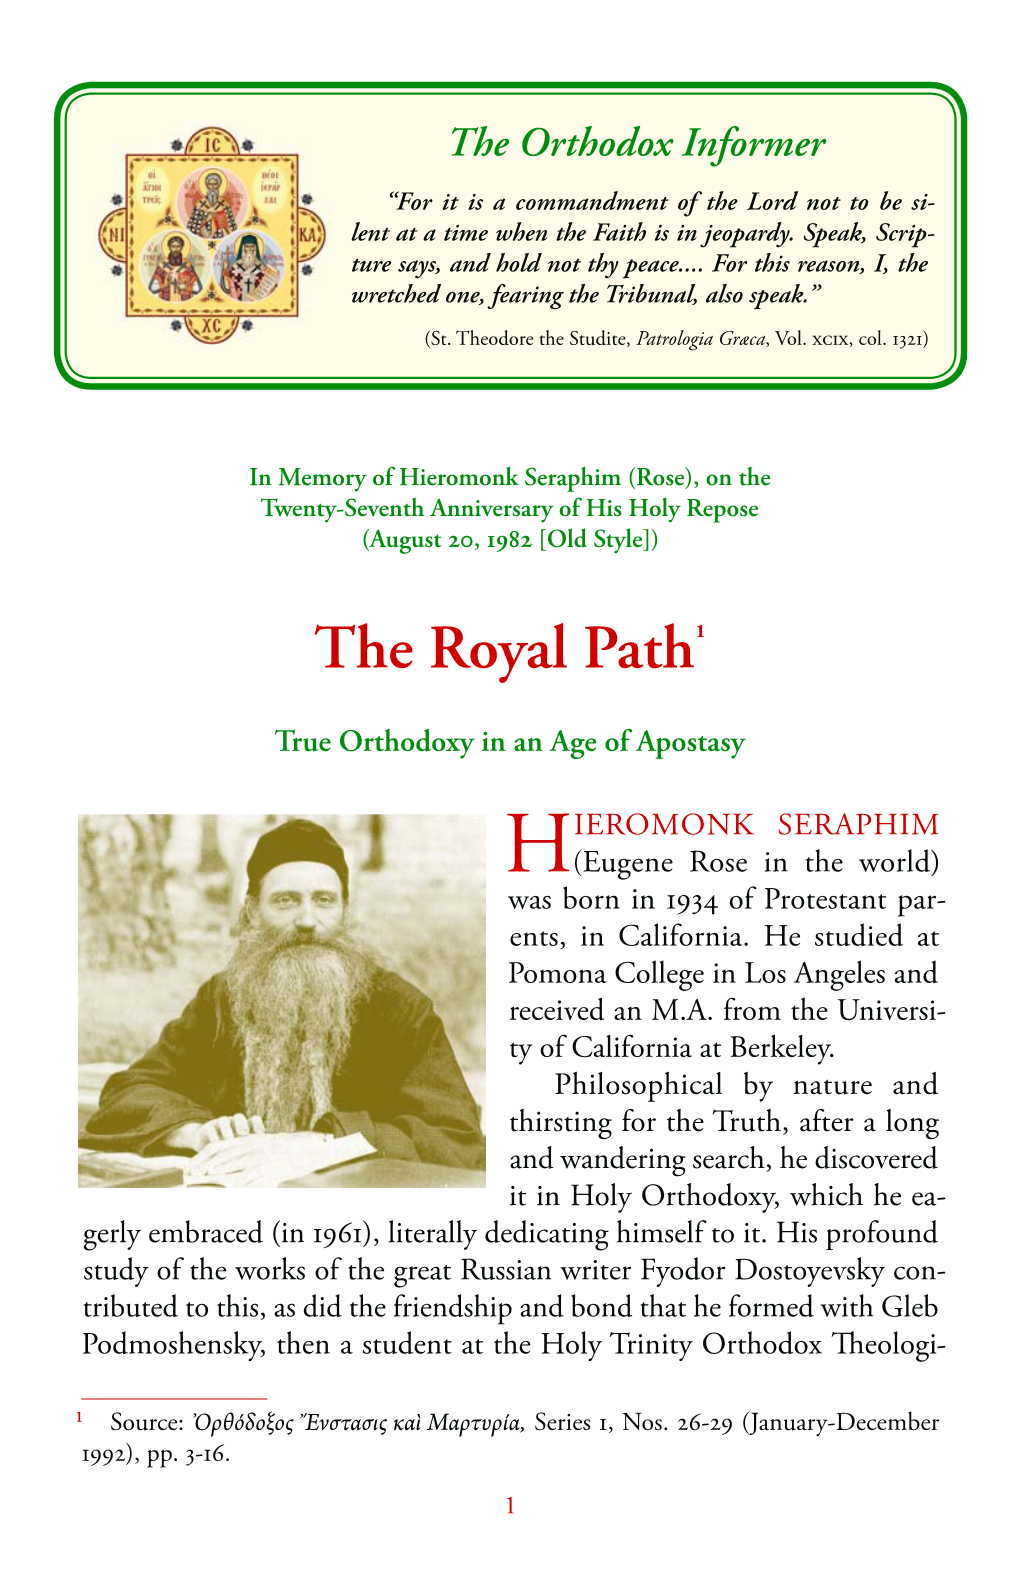 The Royal Path: True Orthodoxy in an Age of Apostasy